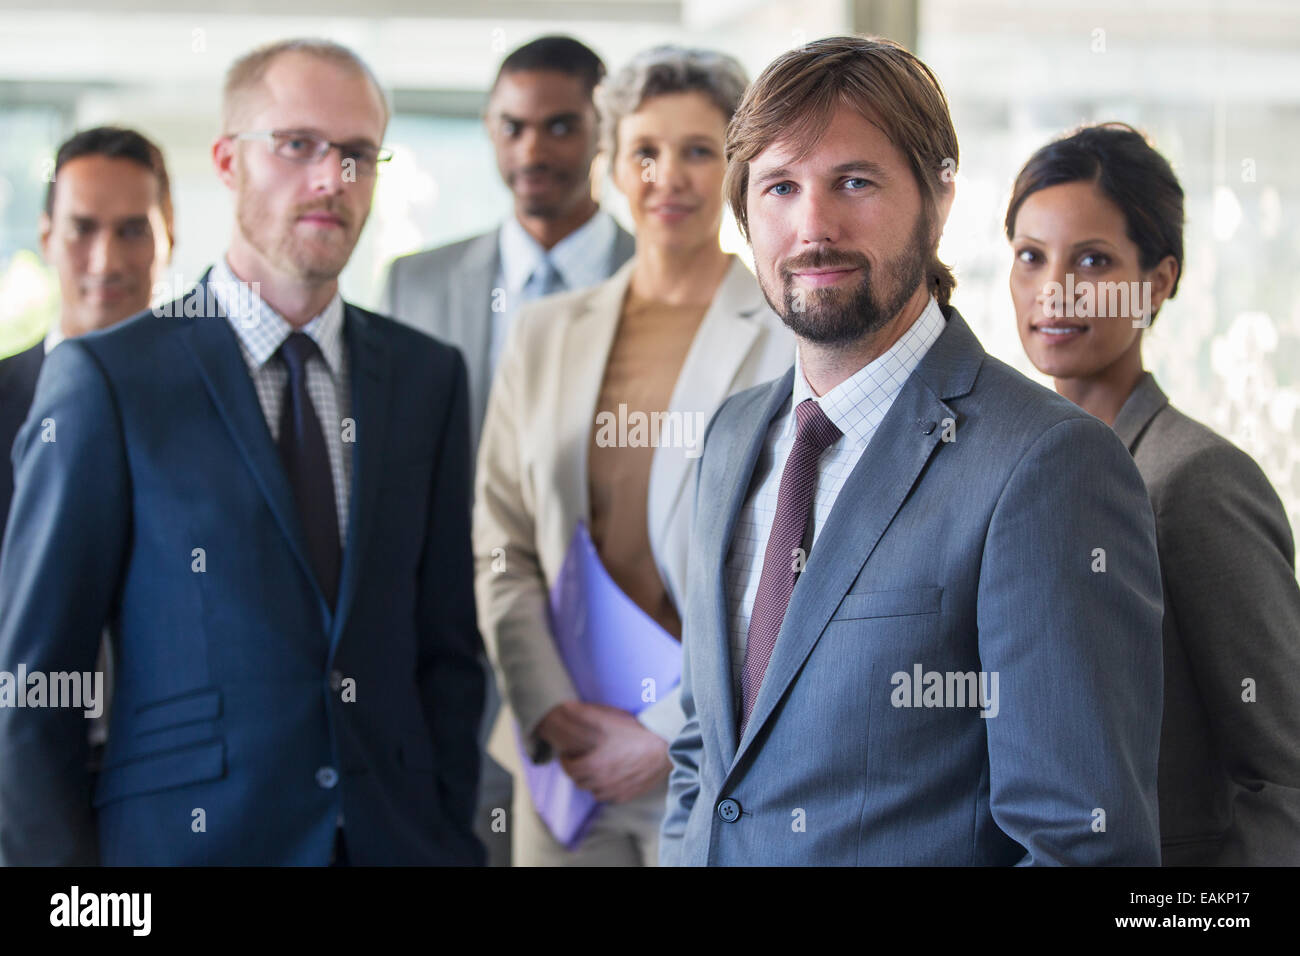 Group portrait of successful office team Stock Photo